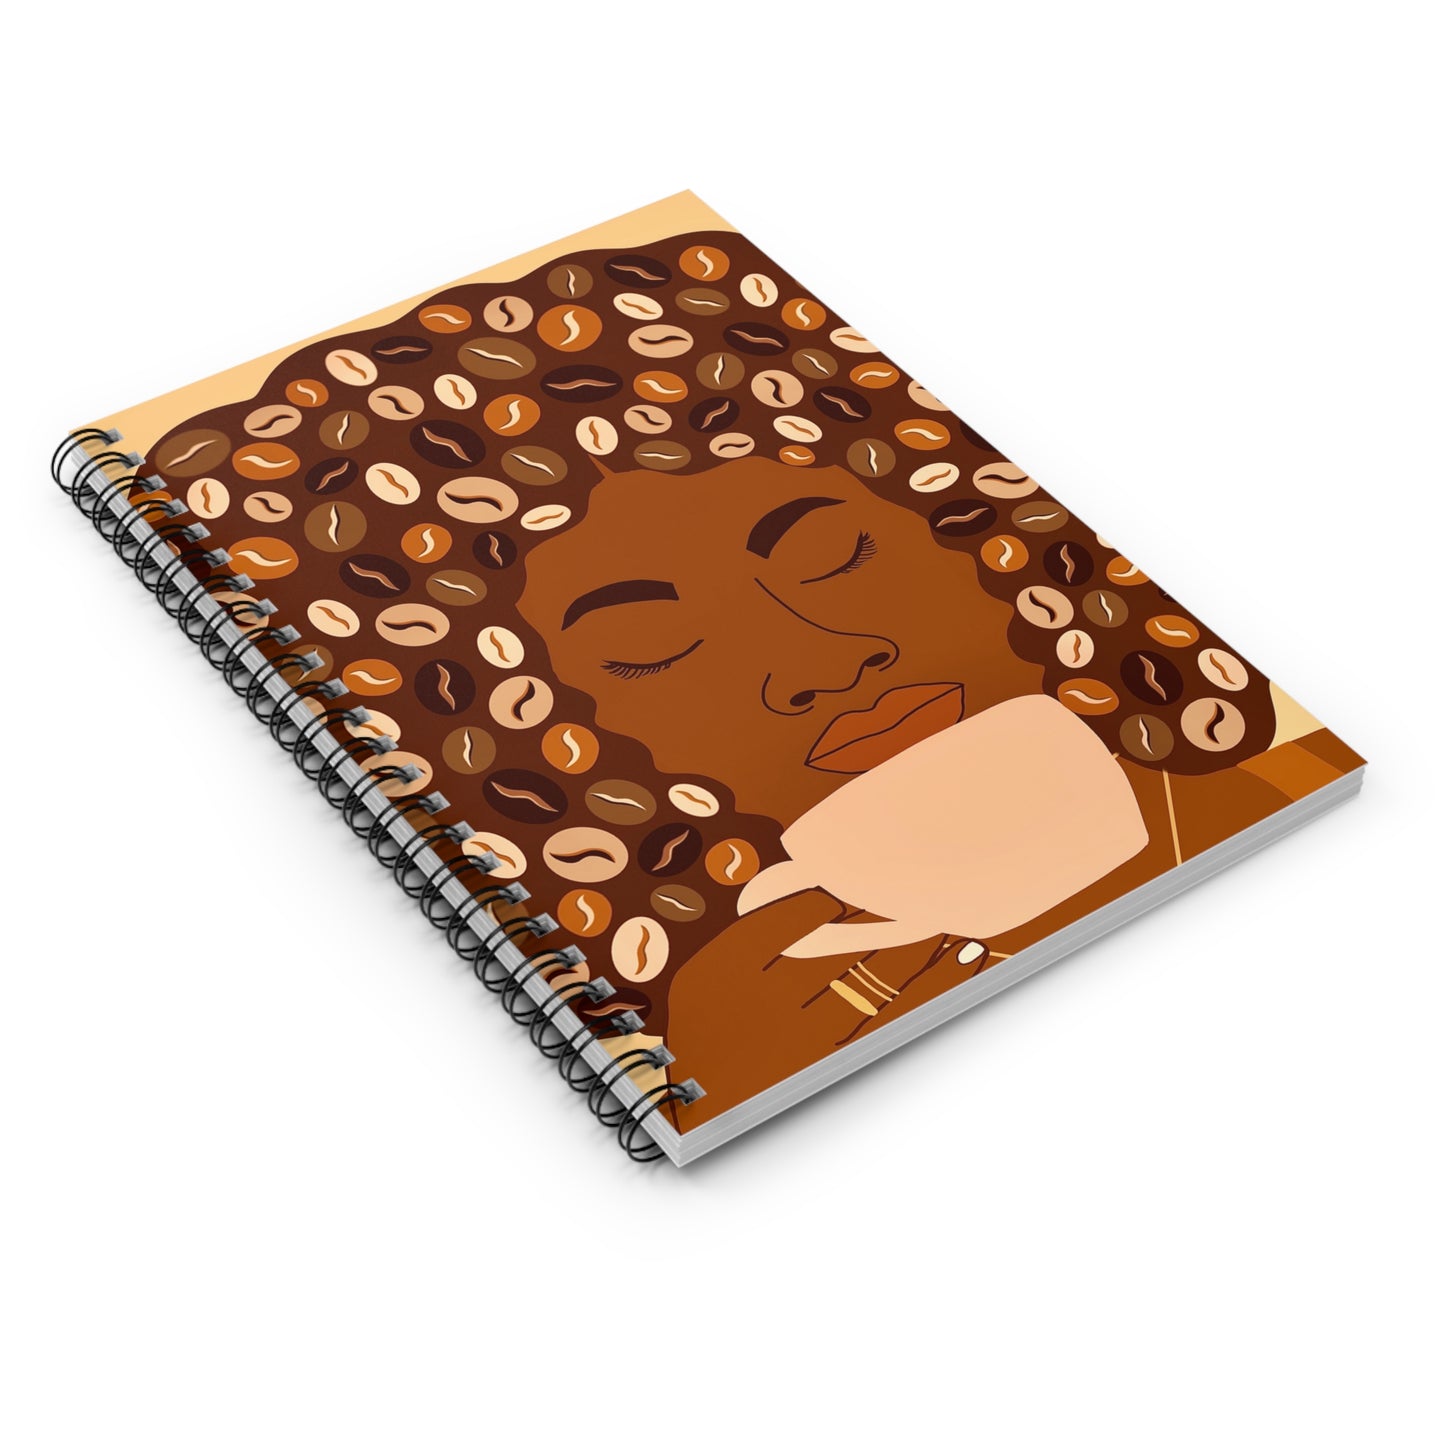 Afro Coffee Spiral Notebook - Ruled Line